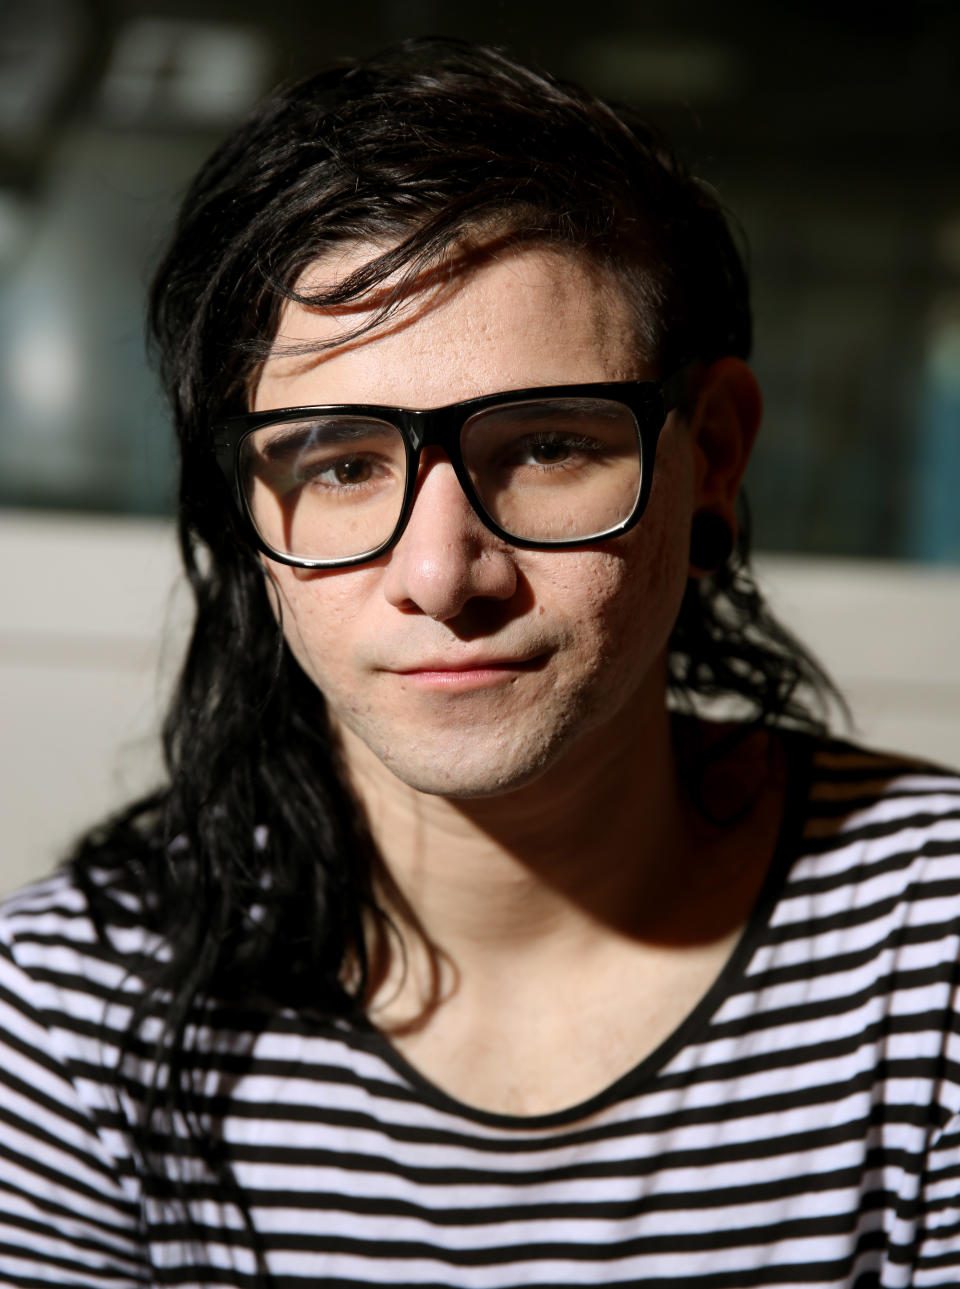 In this Thursday, March 6, 2014 photo, electronic music DJ and producer, Skrillex, whose real name is Sonny Moore, poses for a portrait in Los Angeles. The 26-year-old Grammy Award winner's first official album, "Recess," is out on Tuesday, March 18, 2014. (Photo by Matt Sayles/Invision/AP)